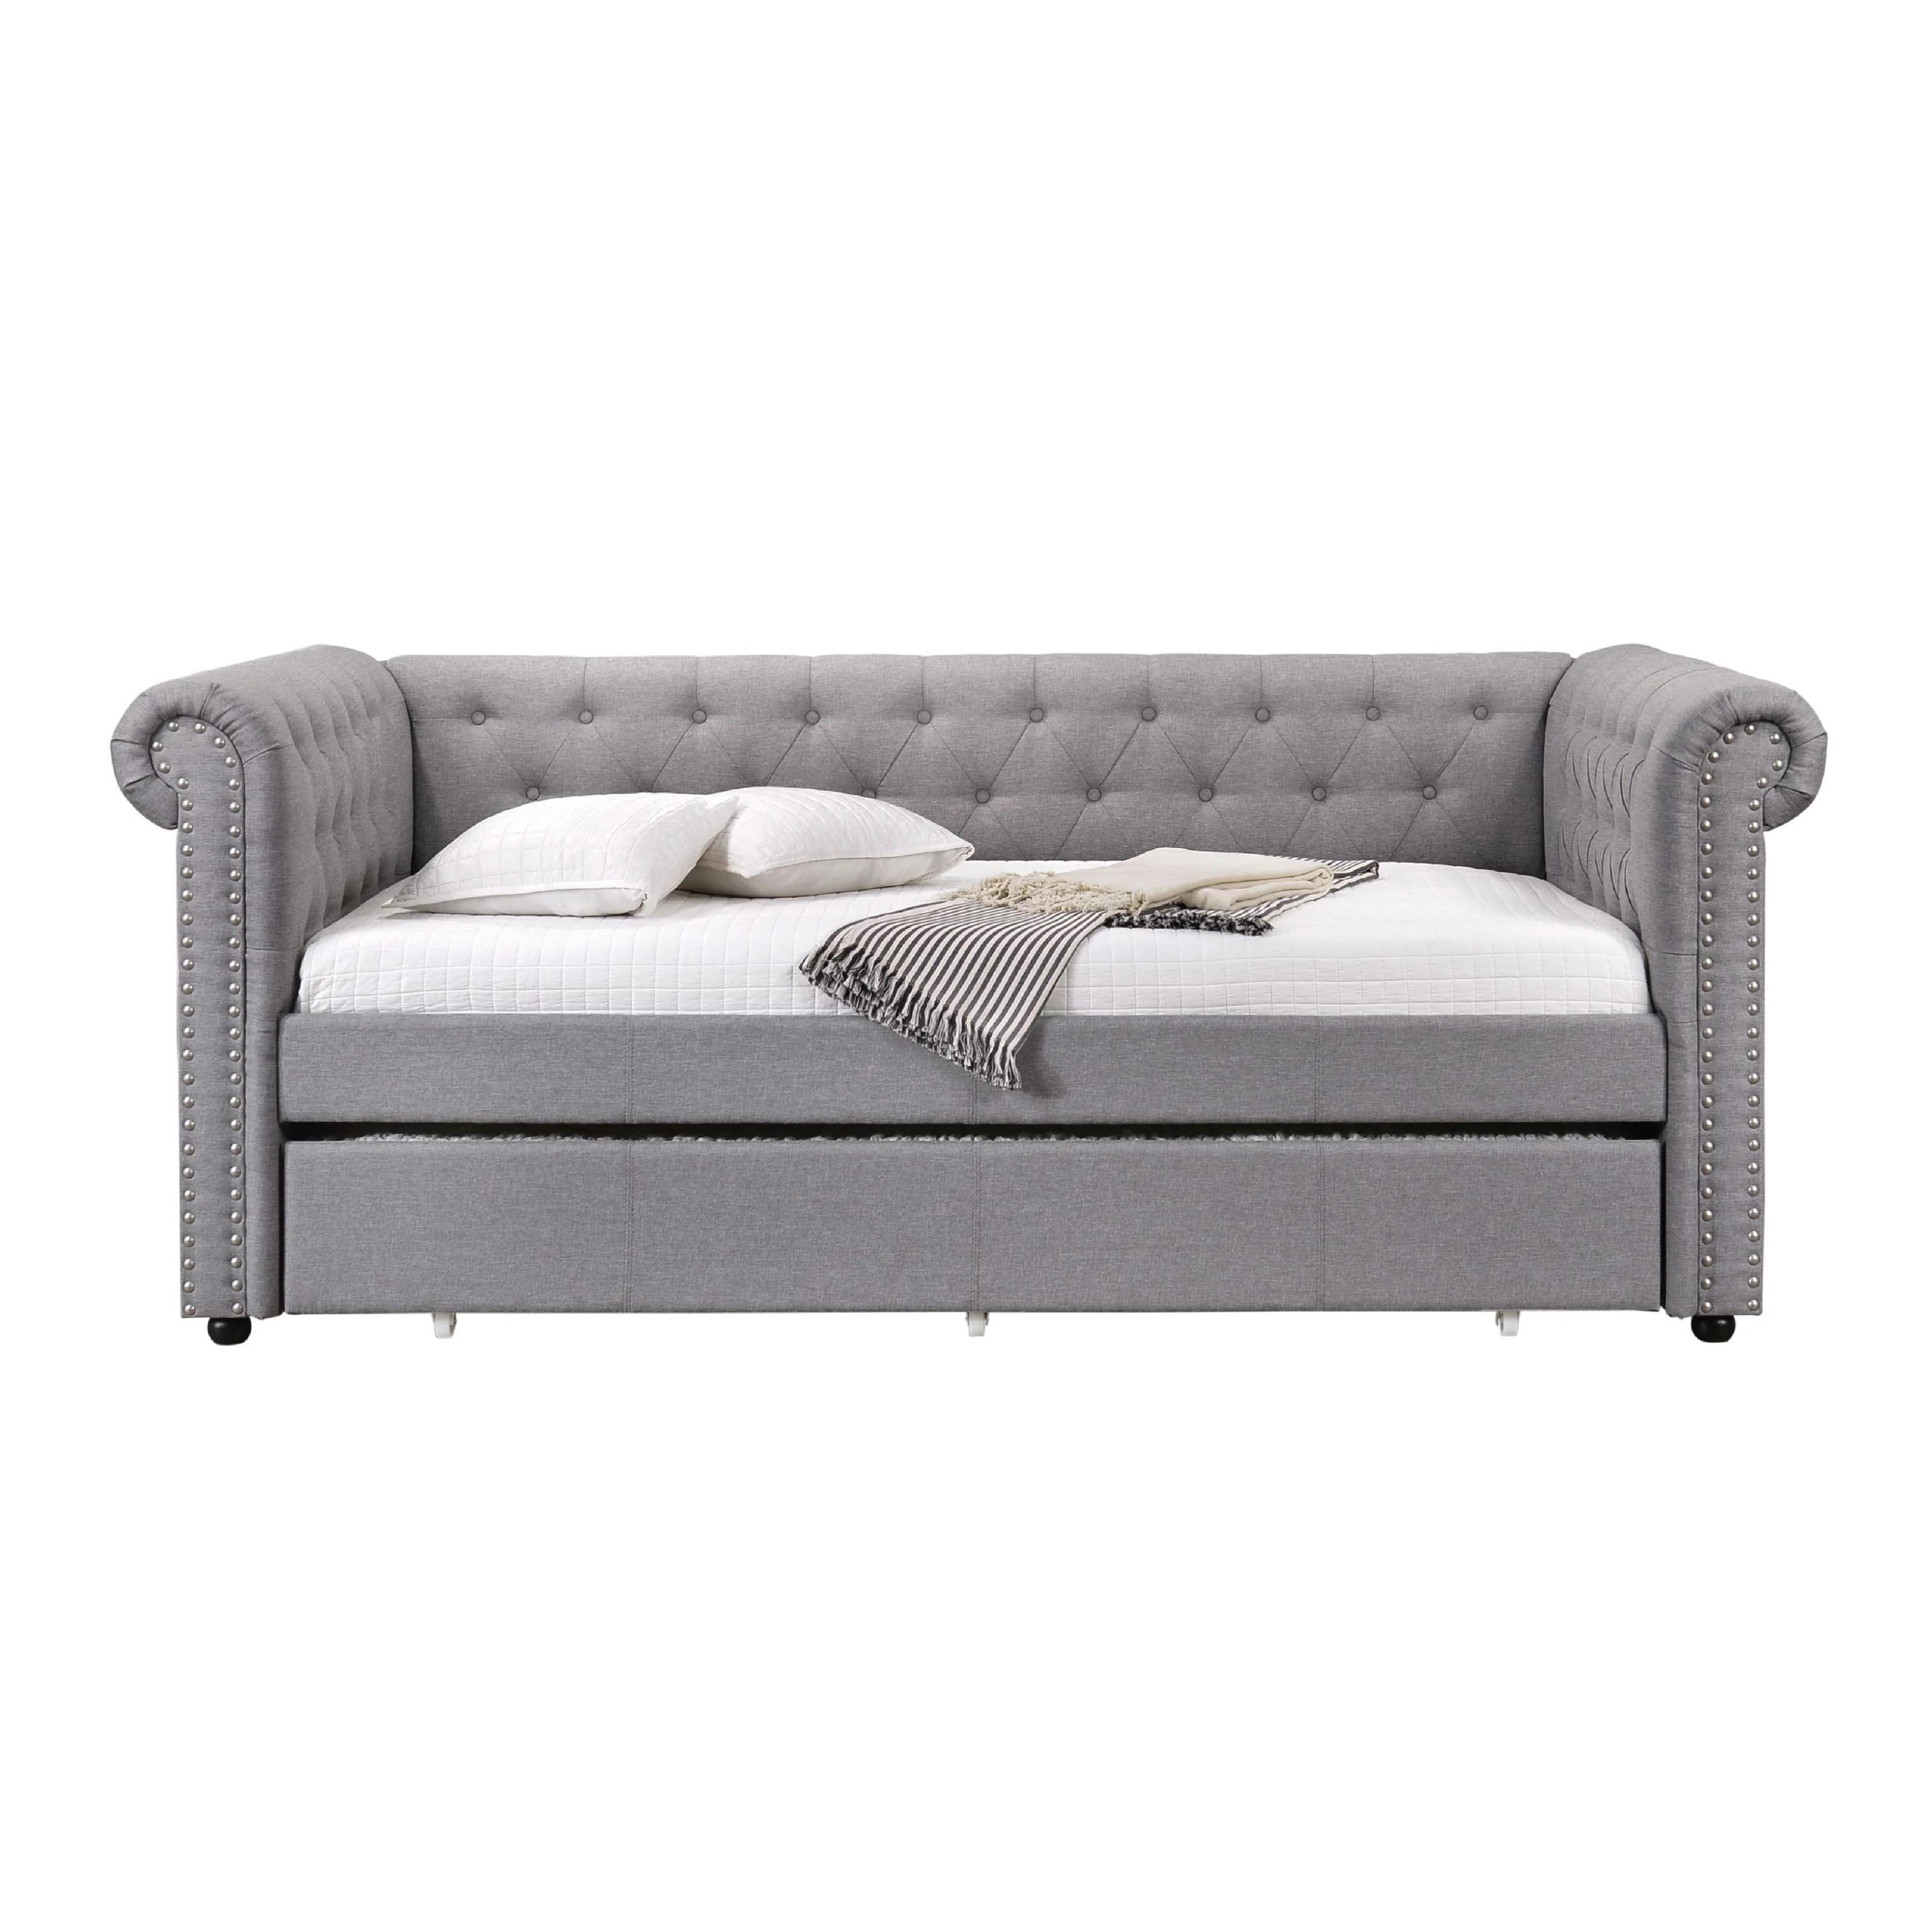 Acme Furniture Justice Daybed w/ trundle